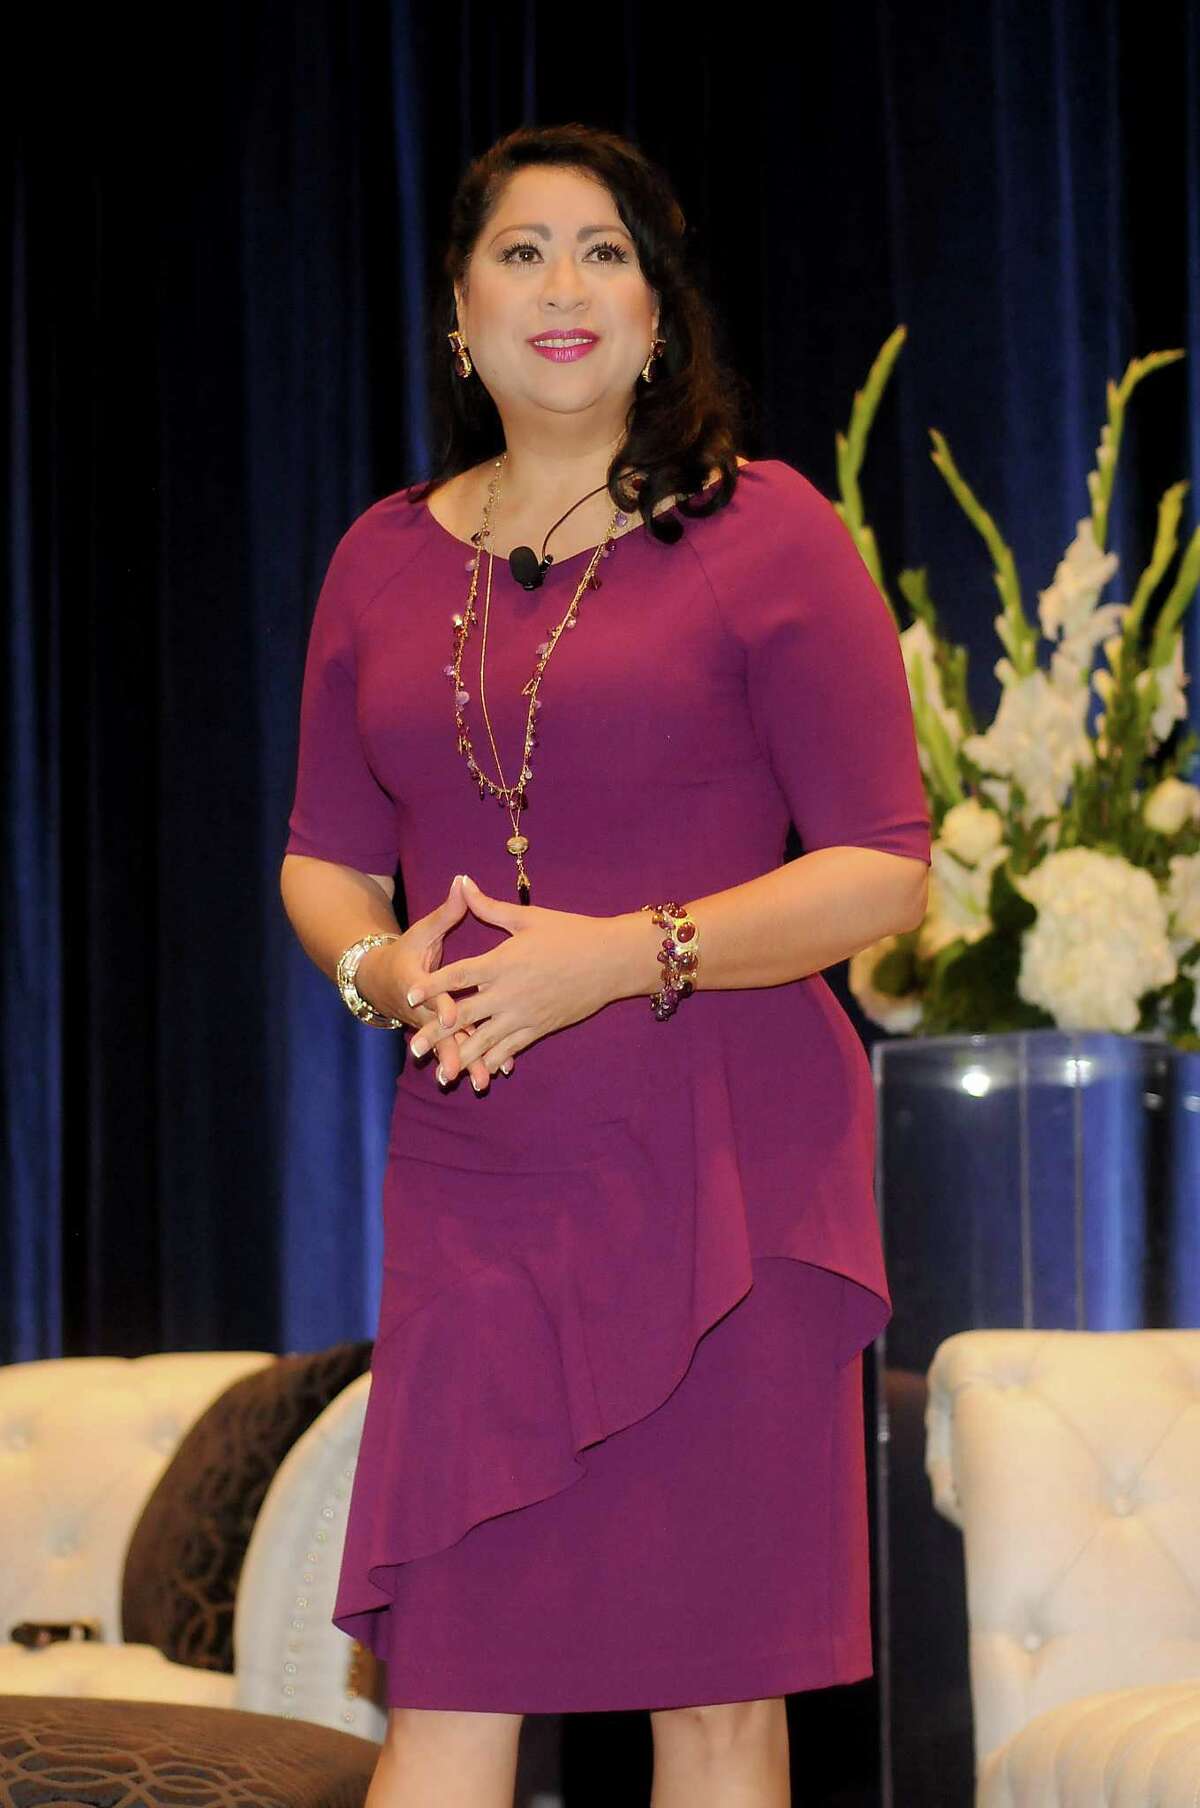 Houston Hispanic Chamber of Commerce president Dr. Laura Murillo speaks at the Hispanic Chamber of Commerce's annual Women's Leadership Conference and Business Expo at the Royal Sonesta Hotel Friday June 30, 2017. Murillo noted that the Latino community has historically shied away from participating in census surveys.